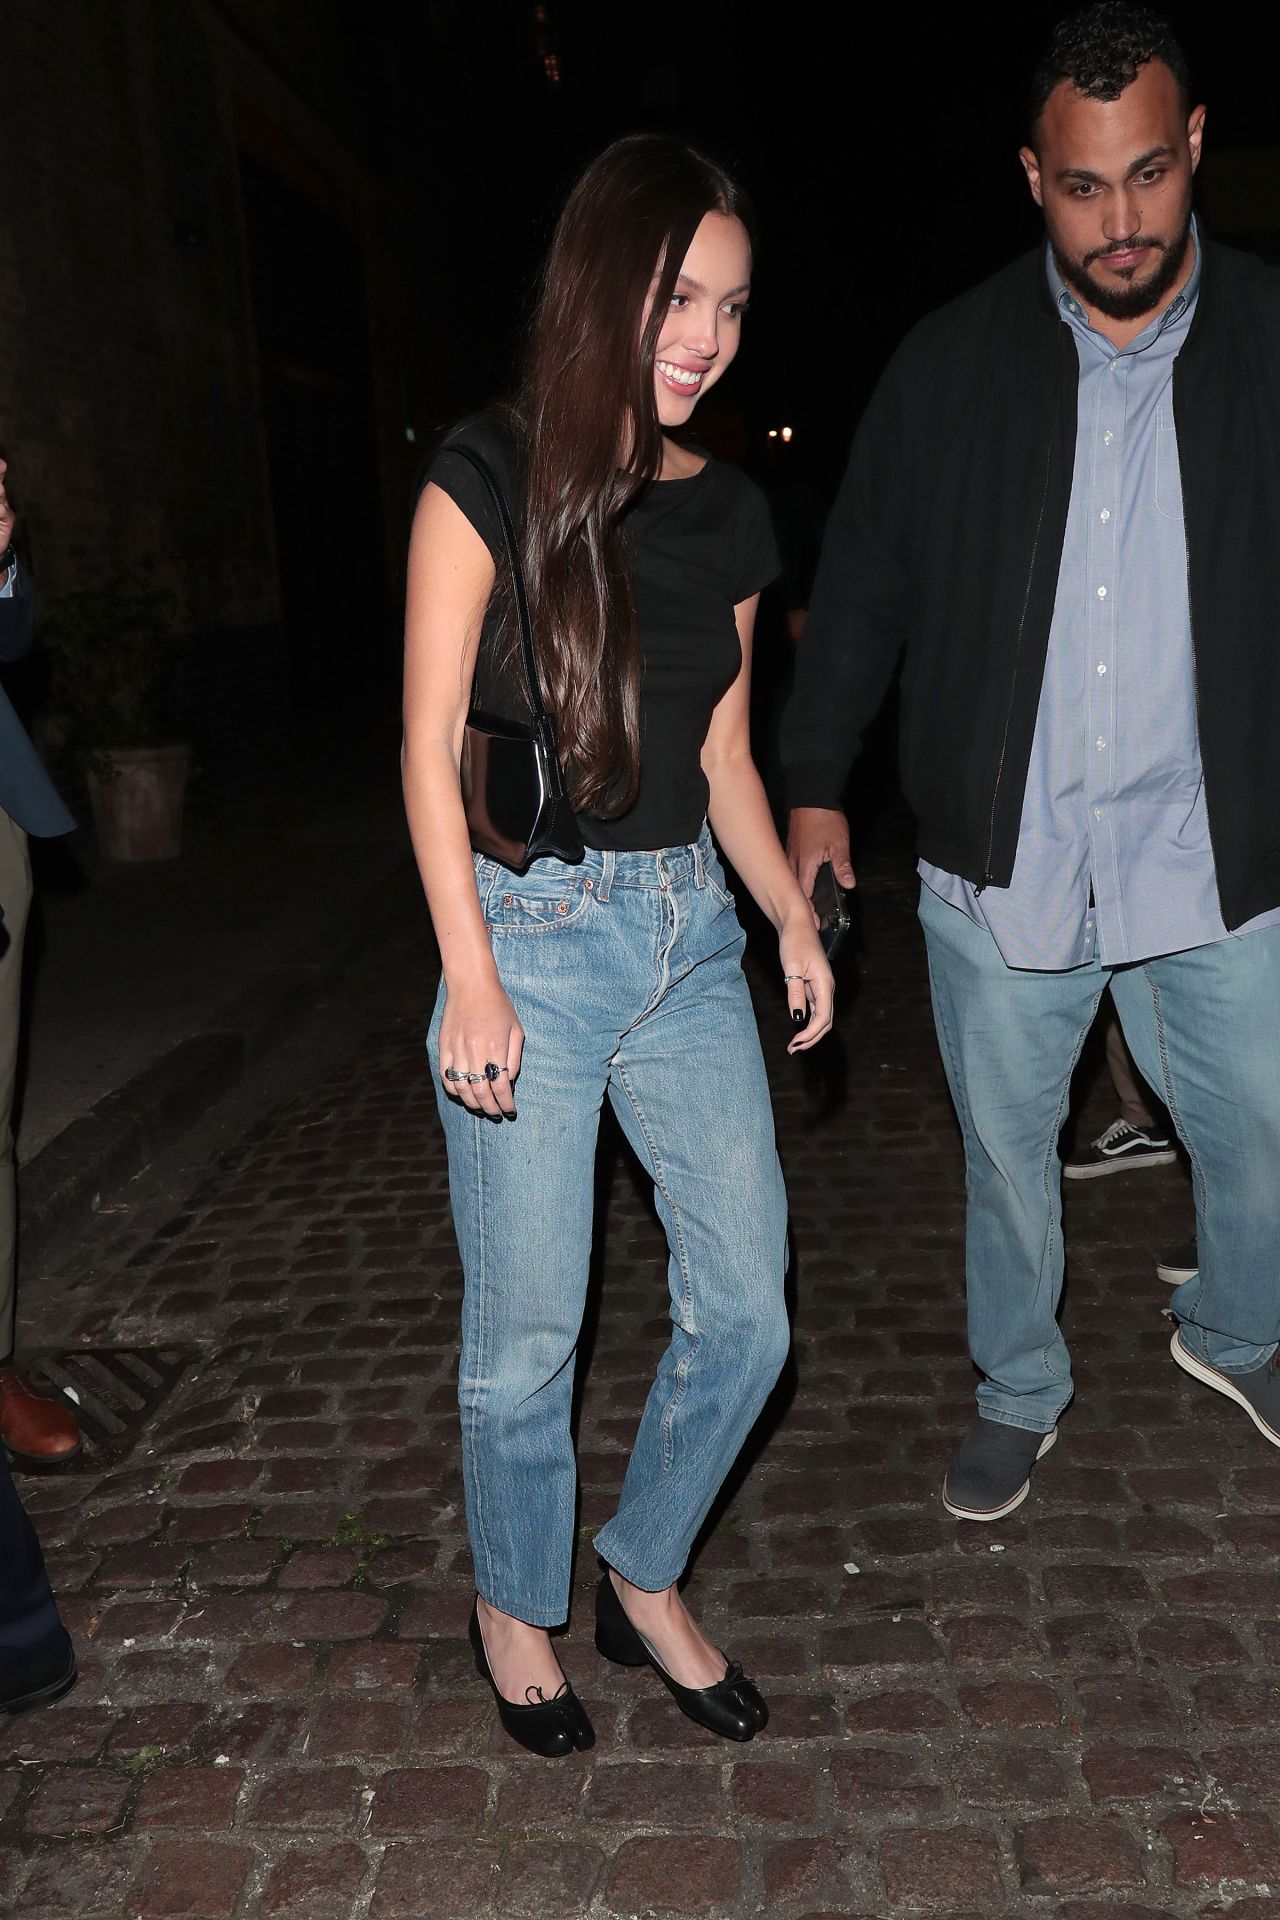 LONDON, ENGLAND - AUGUST 14: Olivia Rodrigo is seen on a night out leaving Chiltern Firehouse on August 14, 2023 in London, England. (Photo by Ricky Vigil M/Justin E Palmer/GC Images)